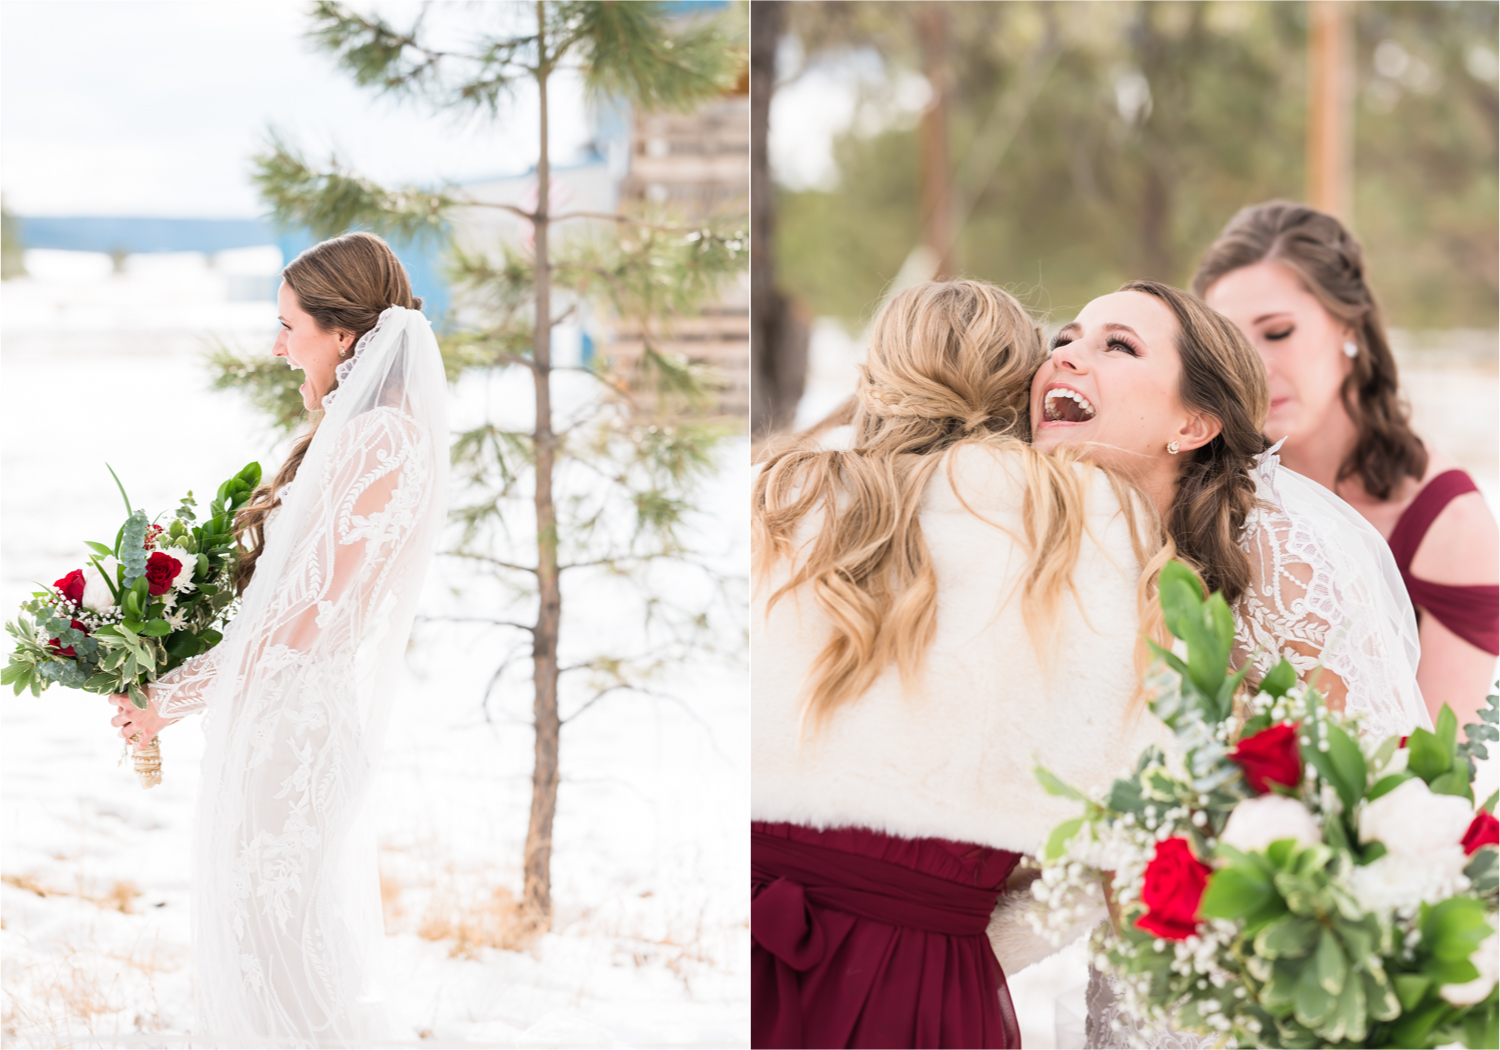 Winter Wonderland Wedding in Colorado Springs | Britni Girard Photography Colorado Wedding Photography and Film Team | Snow covered mountains and Christmas just a few days away | Annika + John's Nostalgic Winter Wedding | Bride's Dress iDream Bridal Essence of Australia | Air Force Academy | Bridesmaid First Look | Bridesmaid Dresses by Azazie